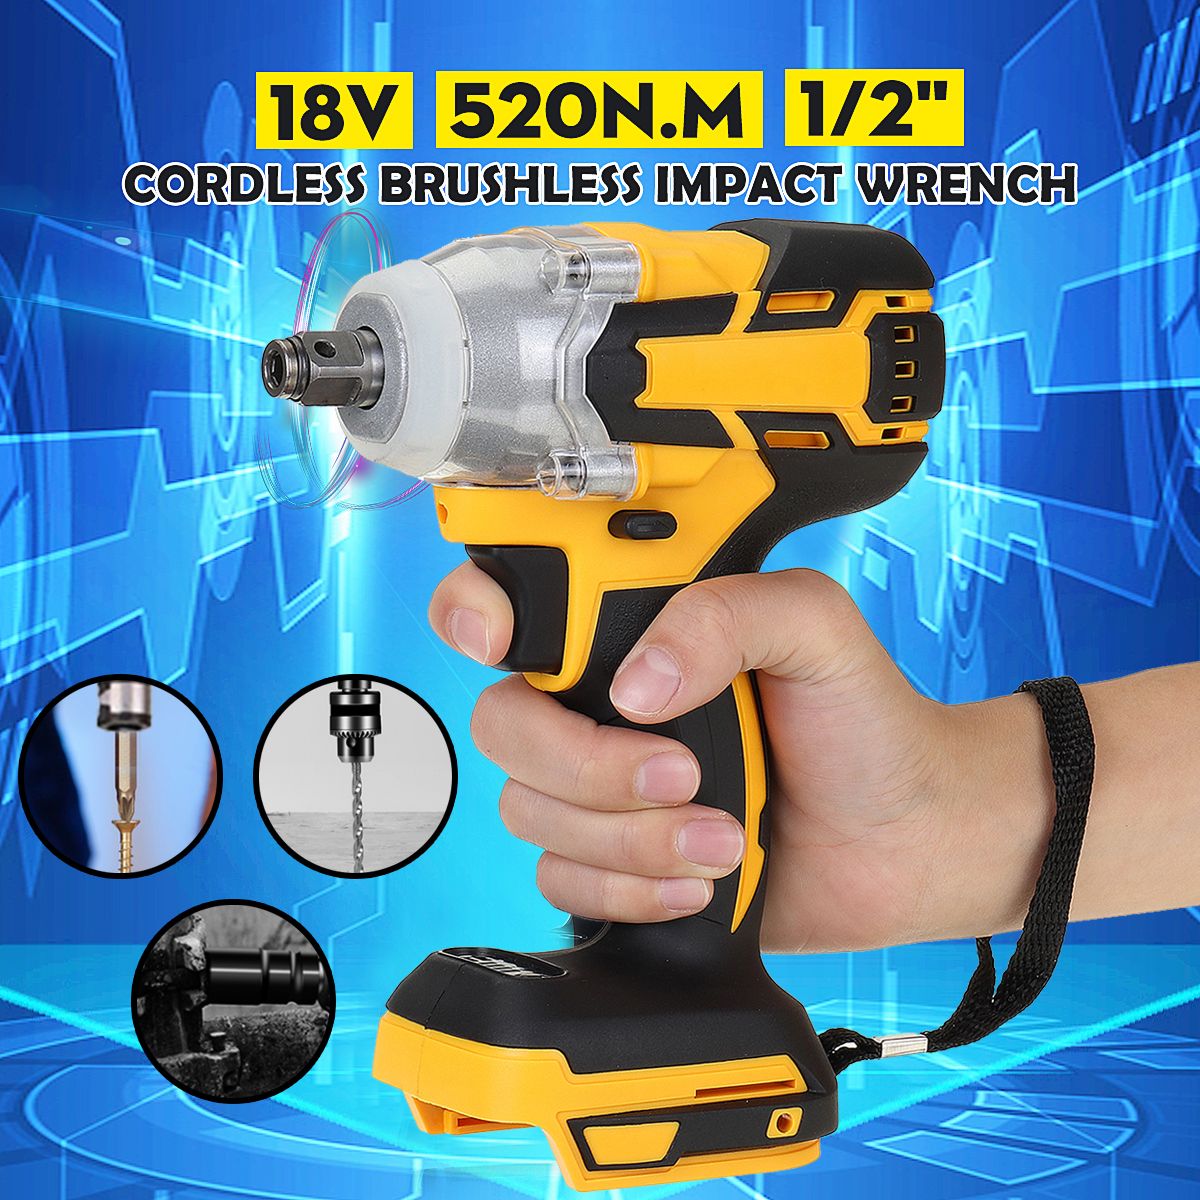 12Inch-18V-520Nm-Cordless-Impact-Wrench-Driver-Brushless-Motor-Stepless-Speed-Electric-Wrench-Adapte-1602646